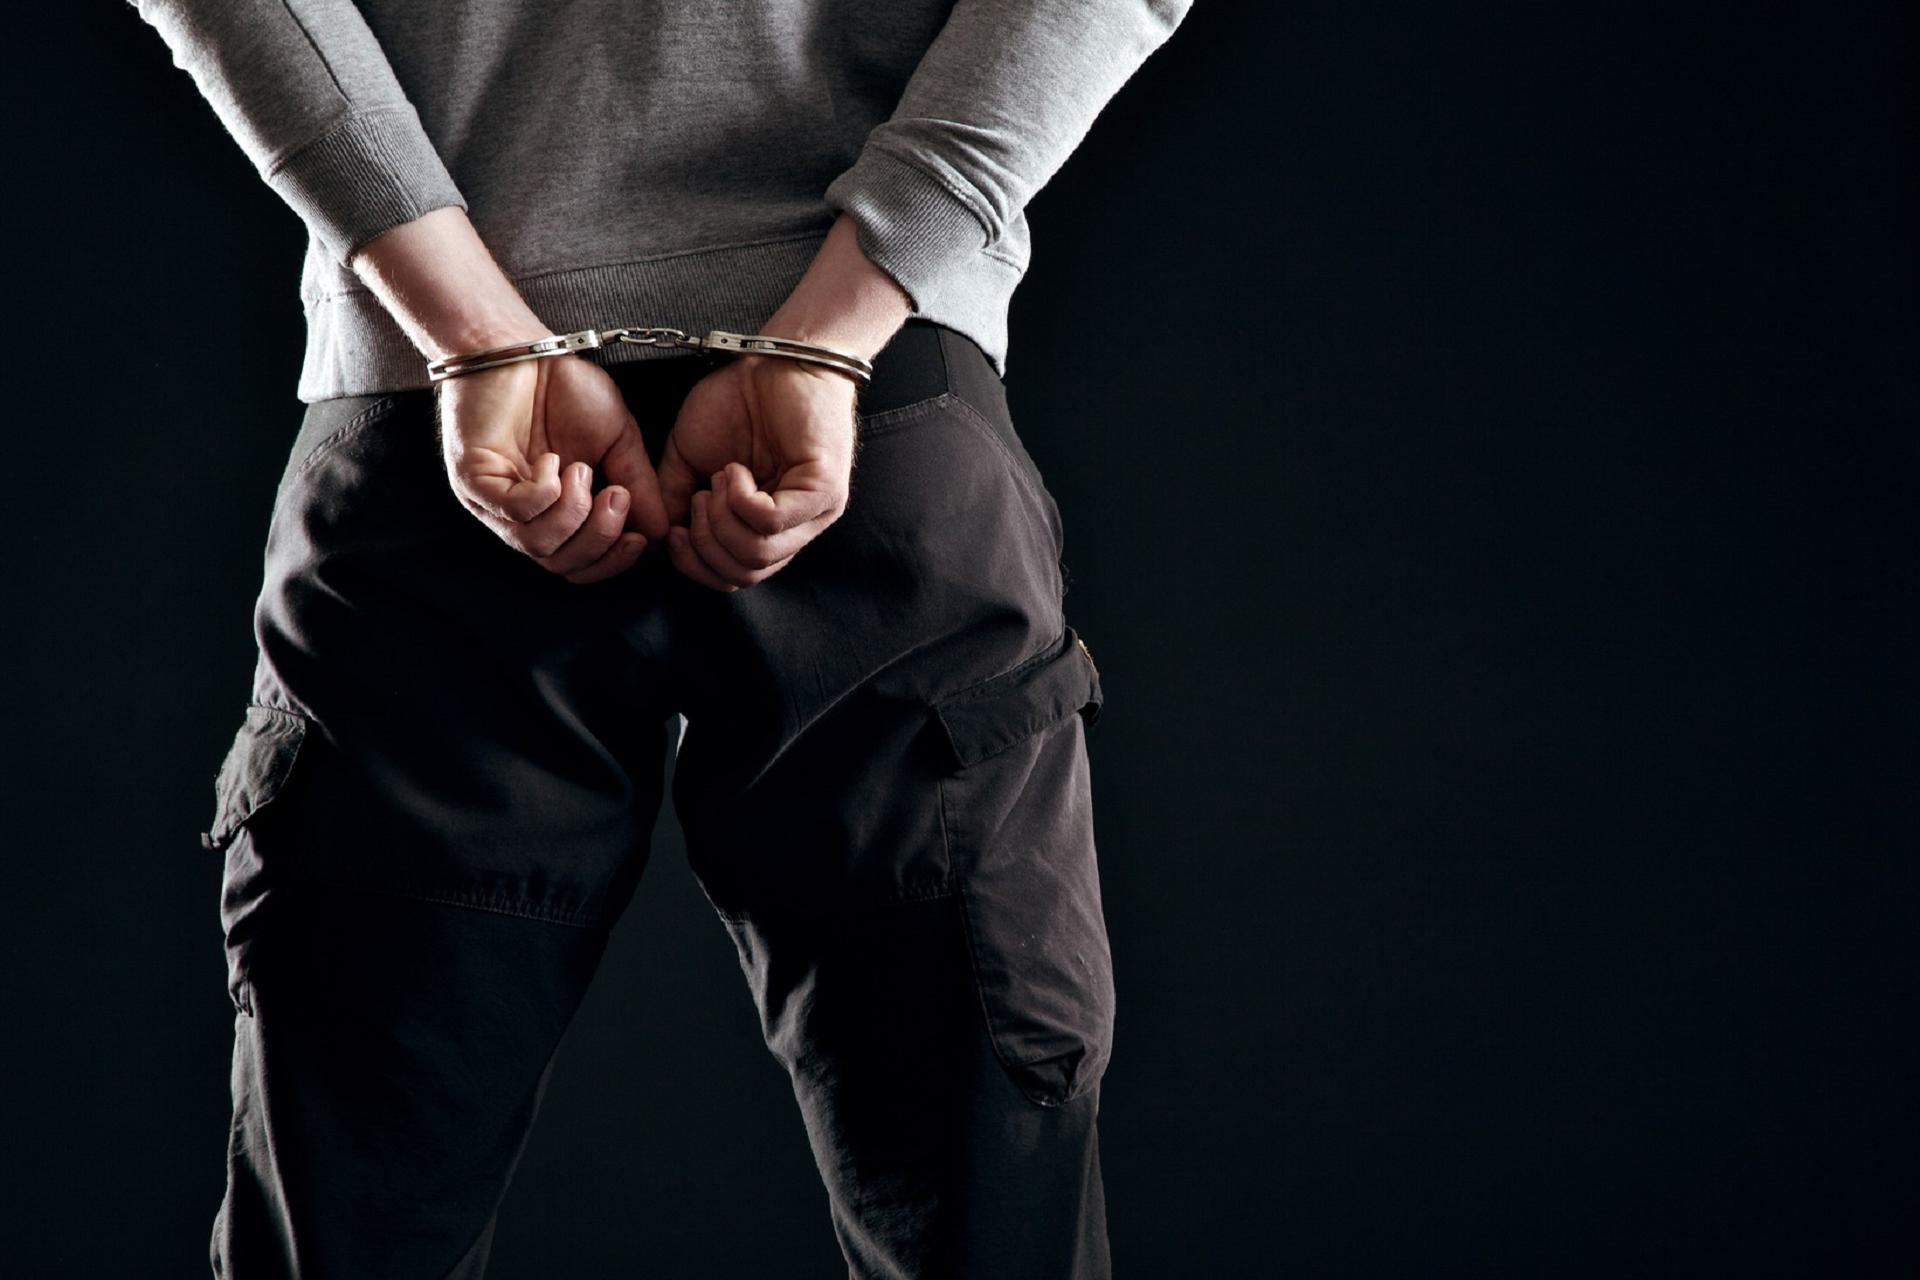 Murderer locked in handcuffs isolated on black